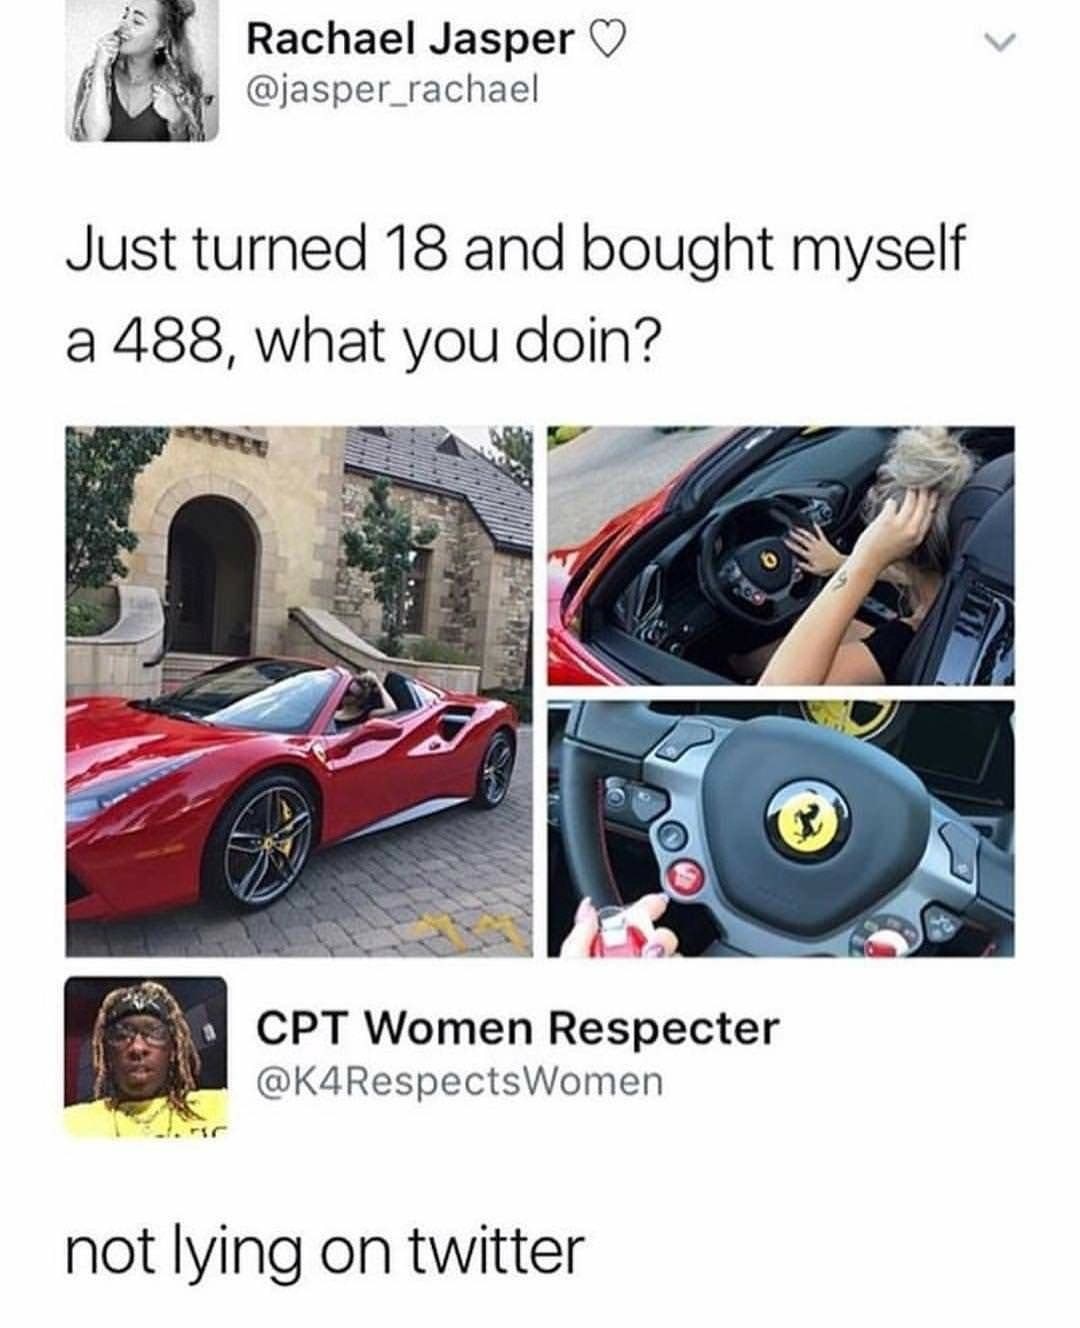 memes  - not lying on twitter meme - Rachael Jasper Just turned 18 and bought myself a 488, what you doin? Cpt Women Respecter Women not lying on twitter